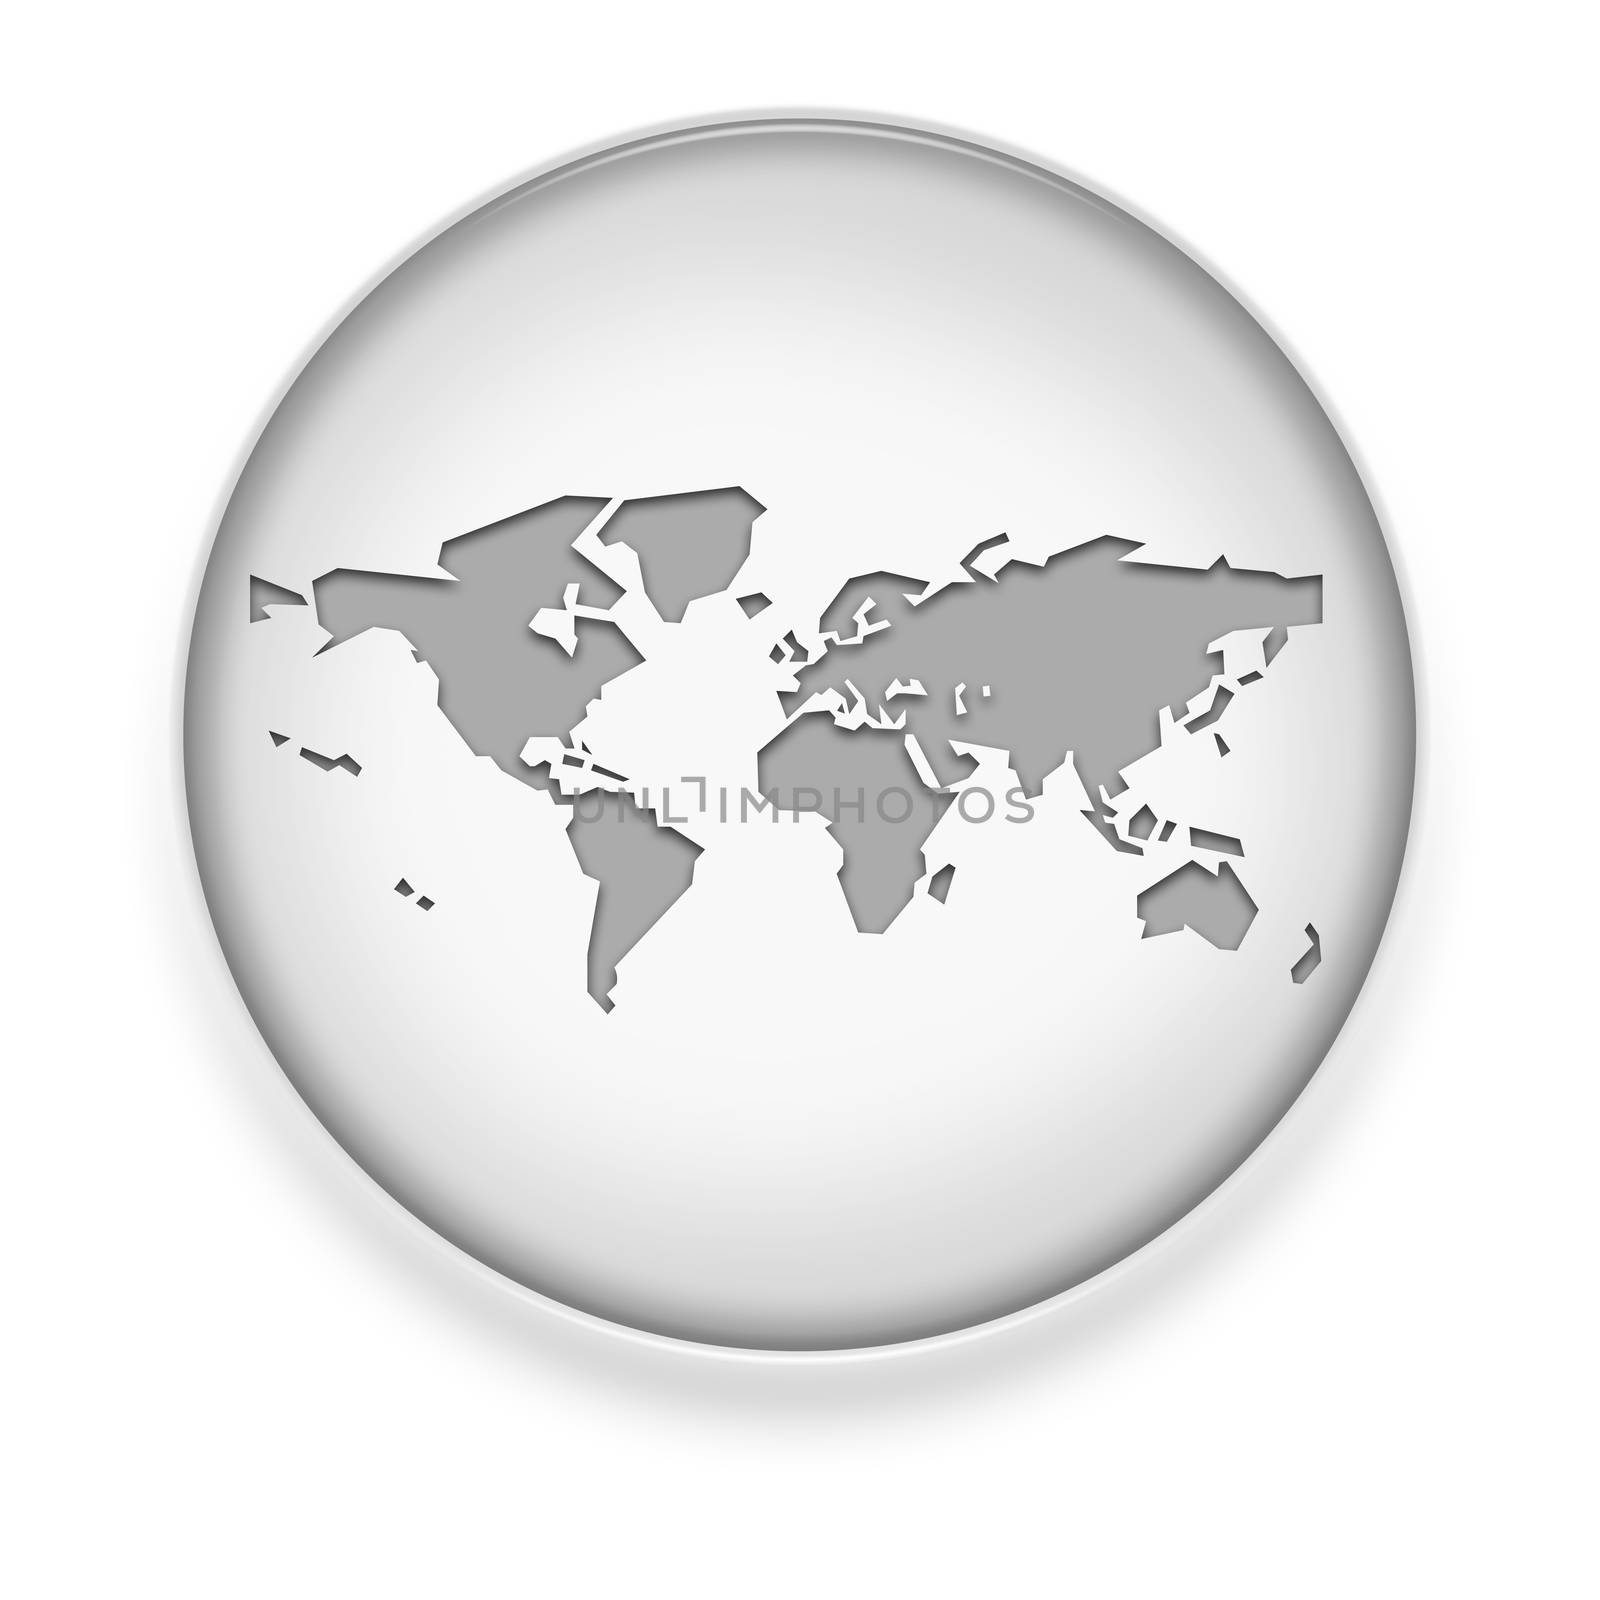 Icon, Button, Pictogram World Map by mindscanner